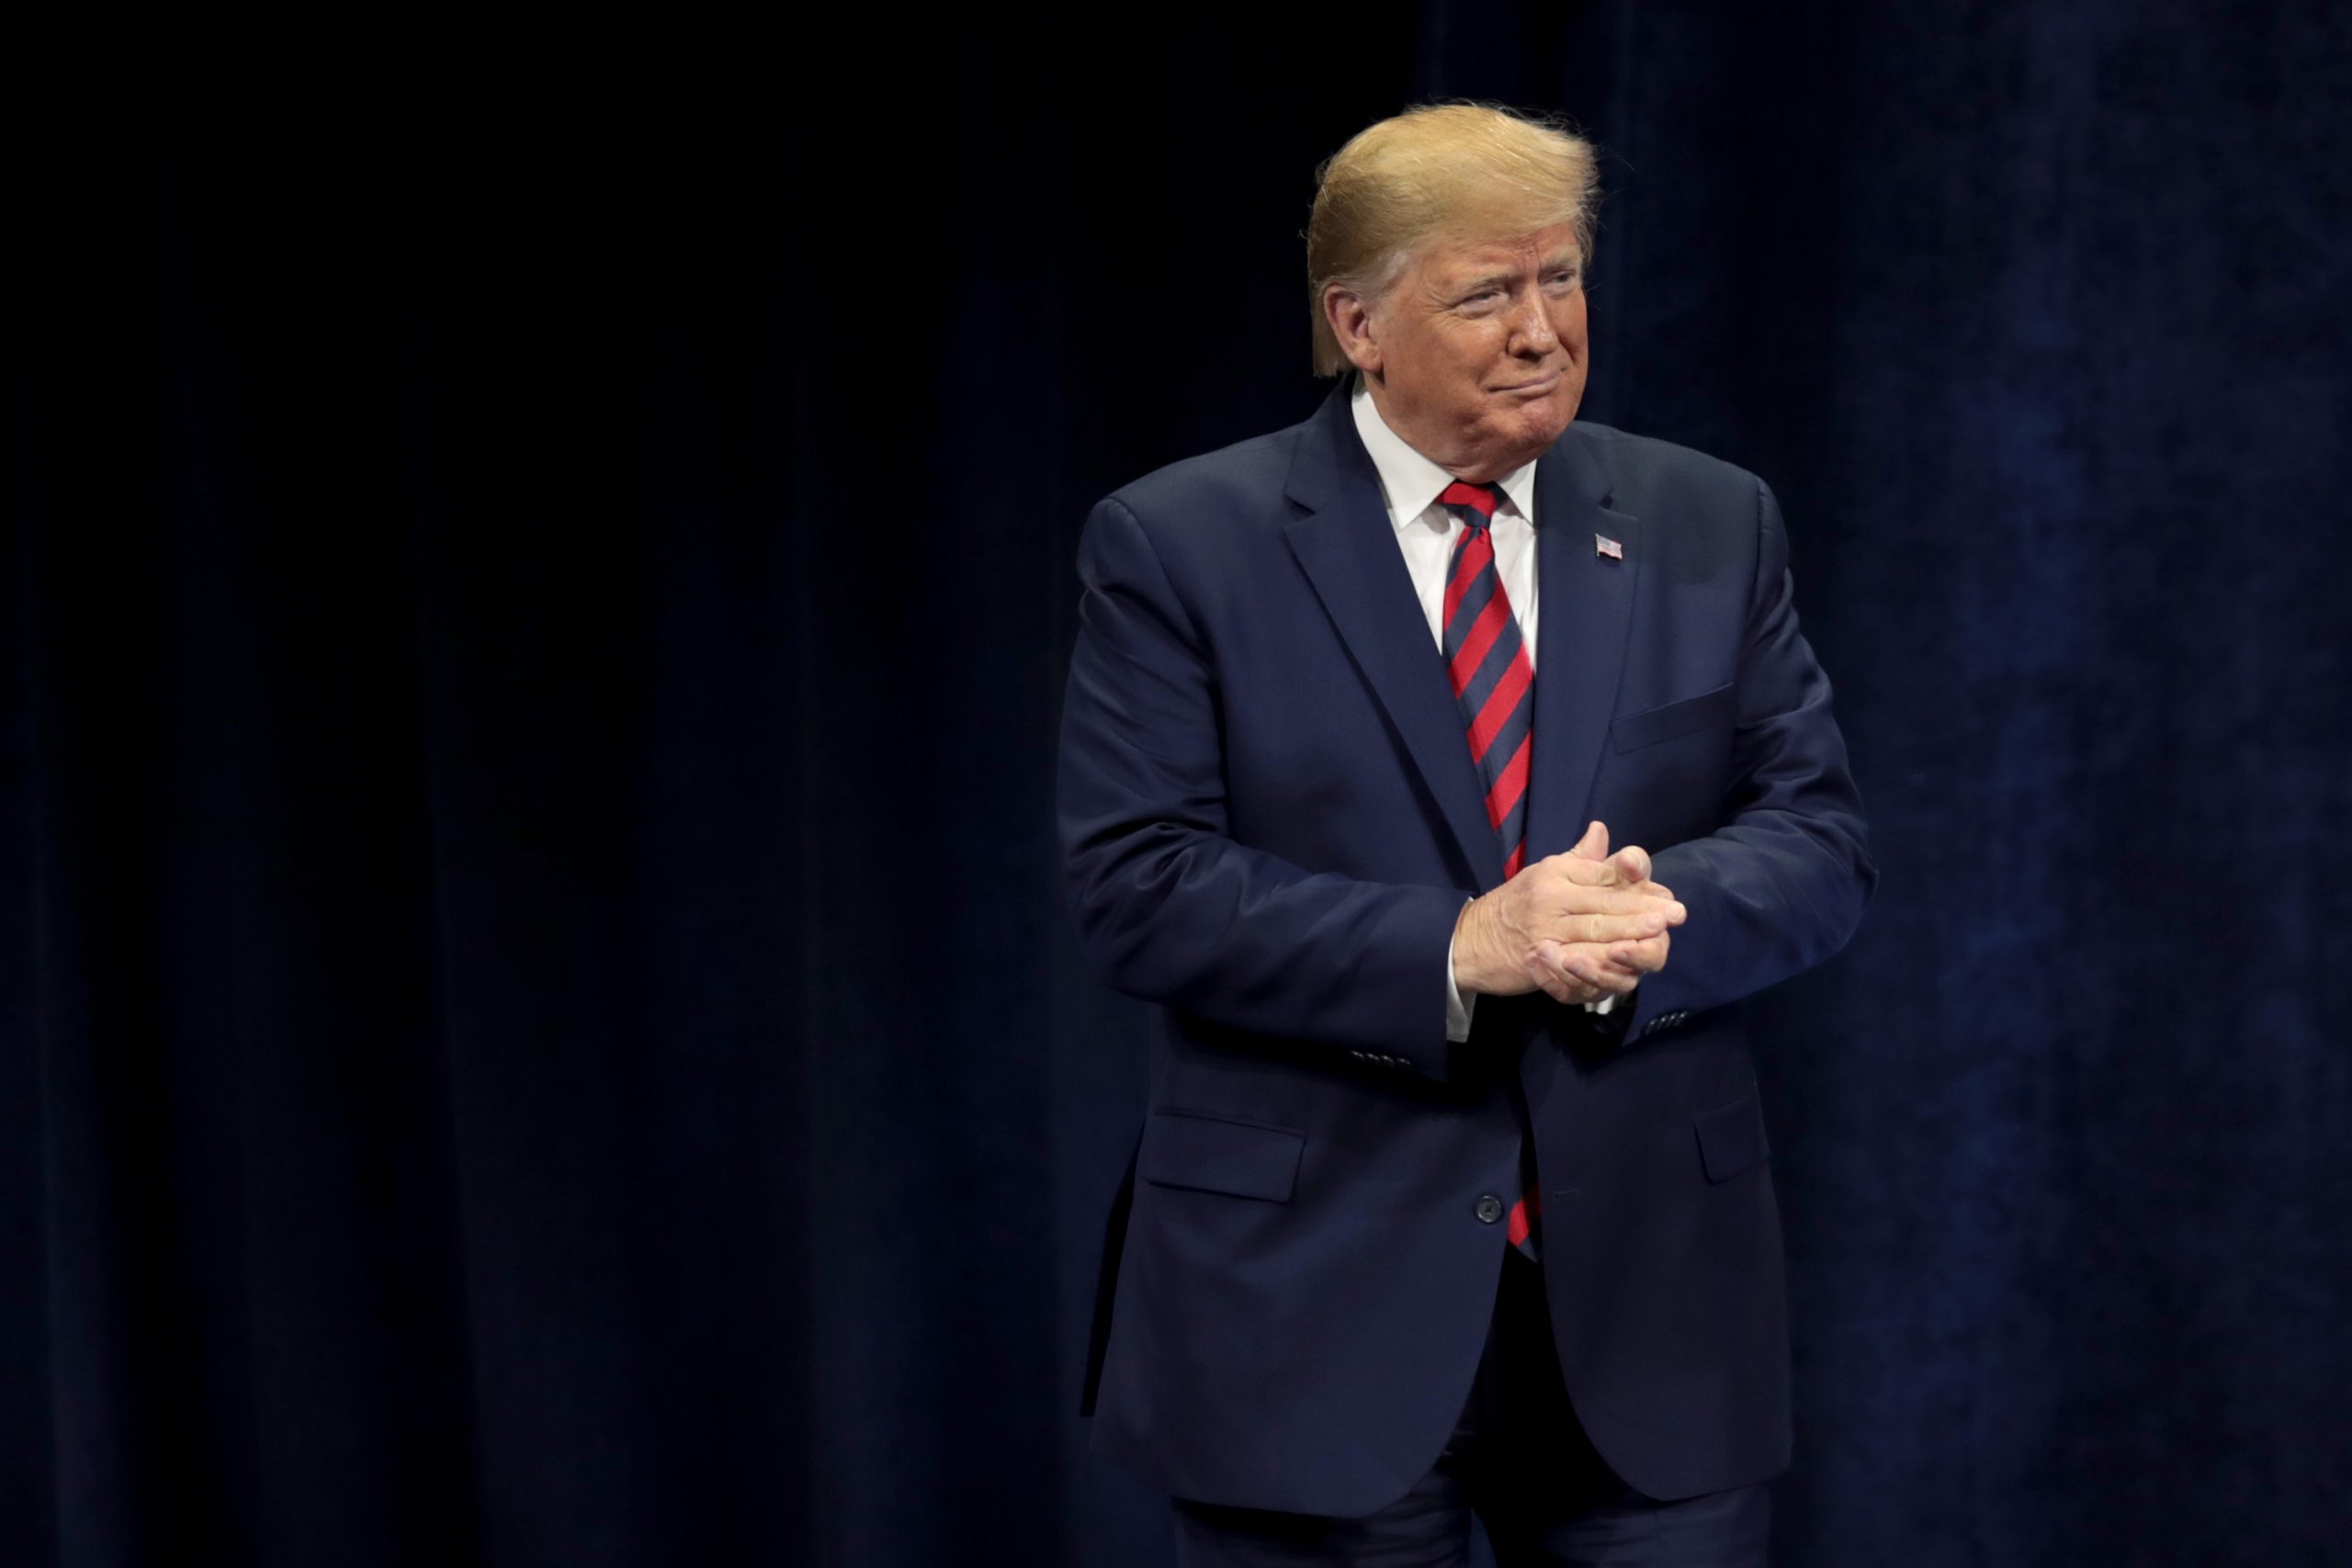 President Donald Trump arrives for an address to the  International Association of Chiefs of Police convention on Oct. 28, 2019 in Chicago, Illinois. (Getty Images&mdash;Getty Images)